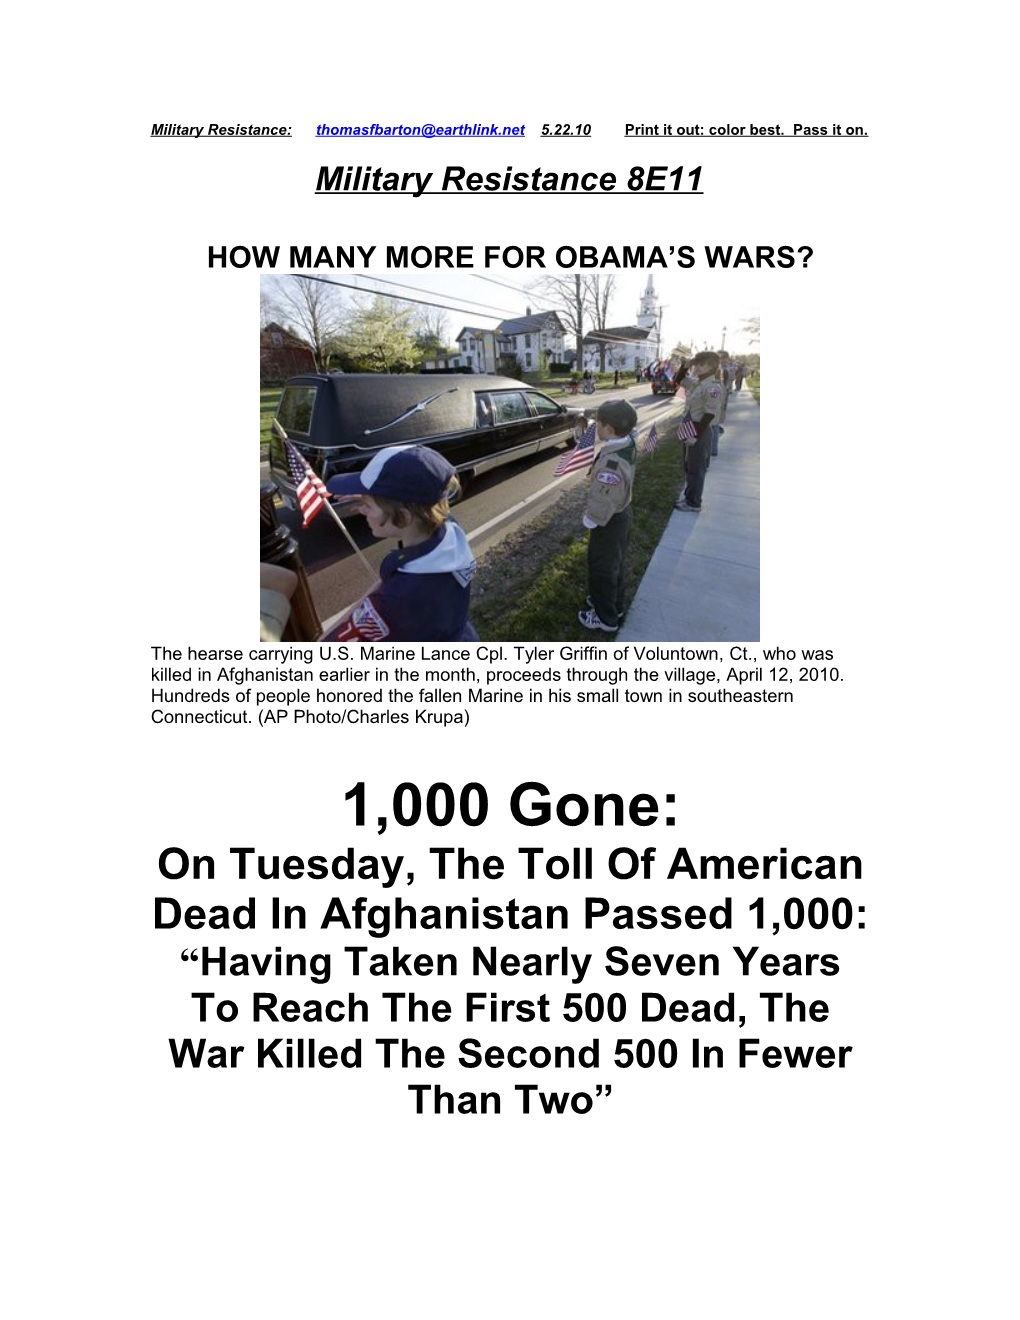 How Many More for Obama S Wars?